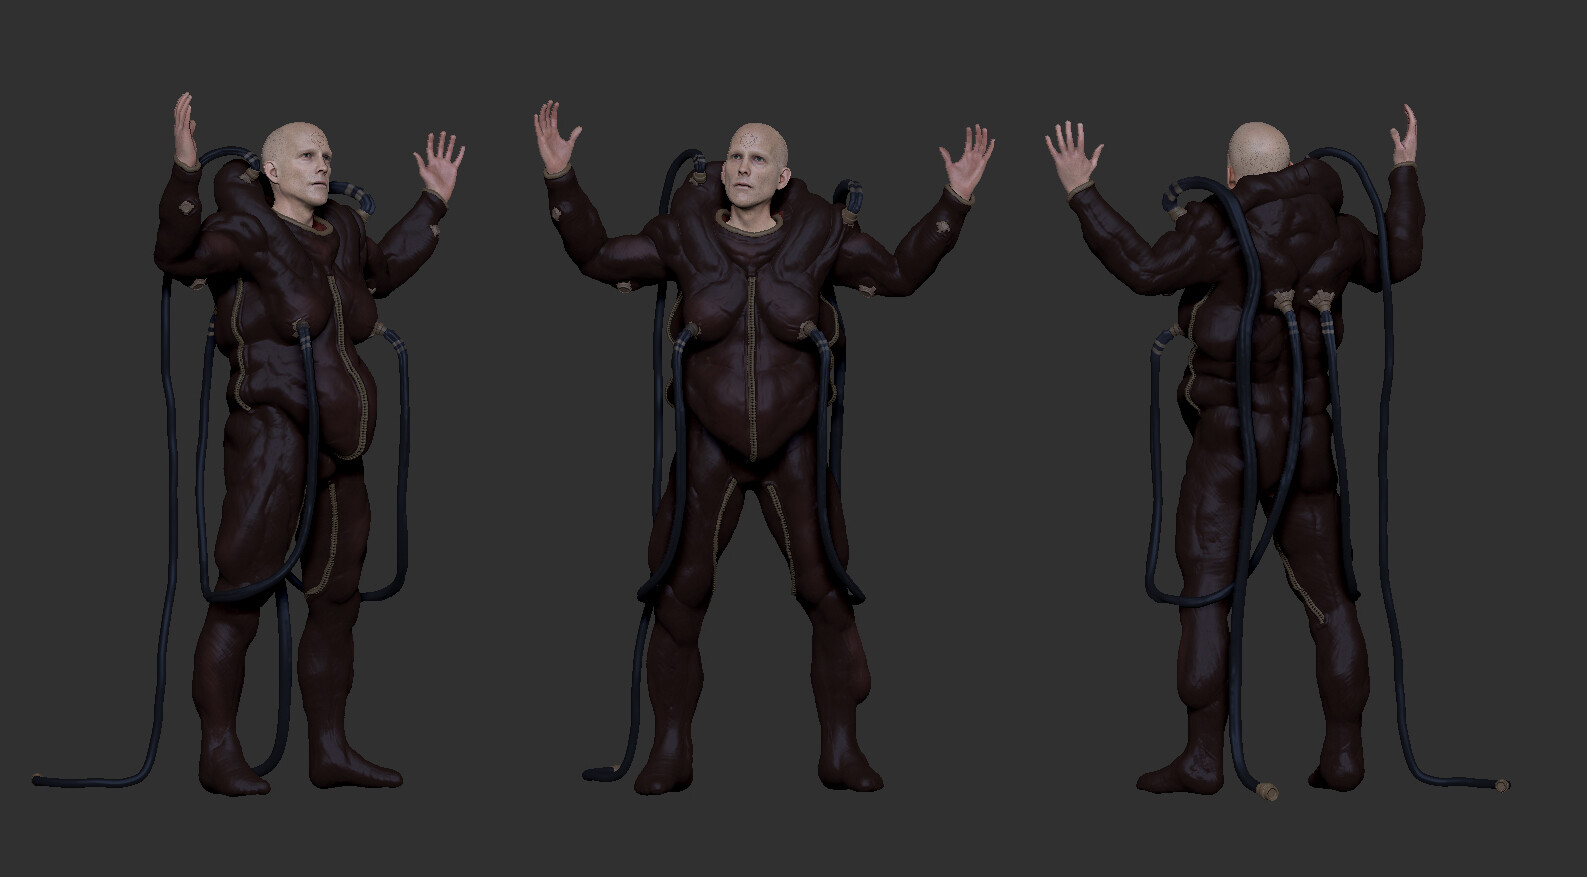 ZBrush character